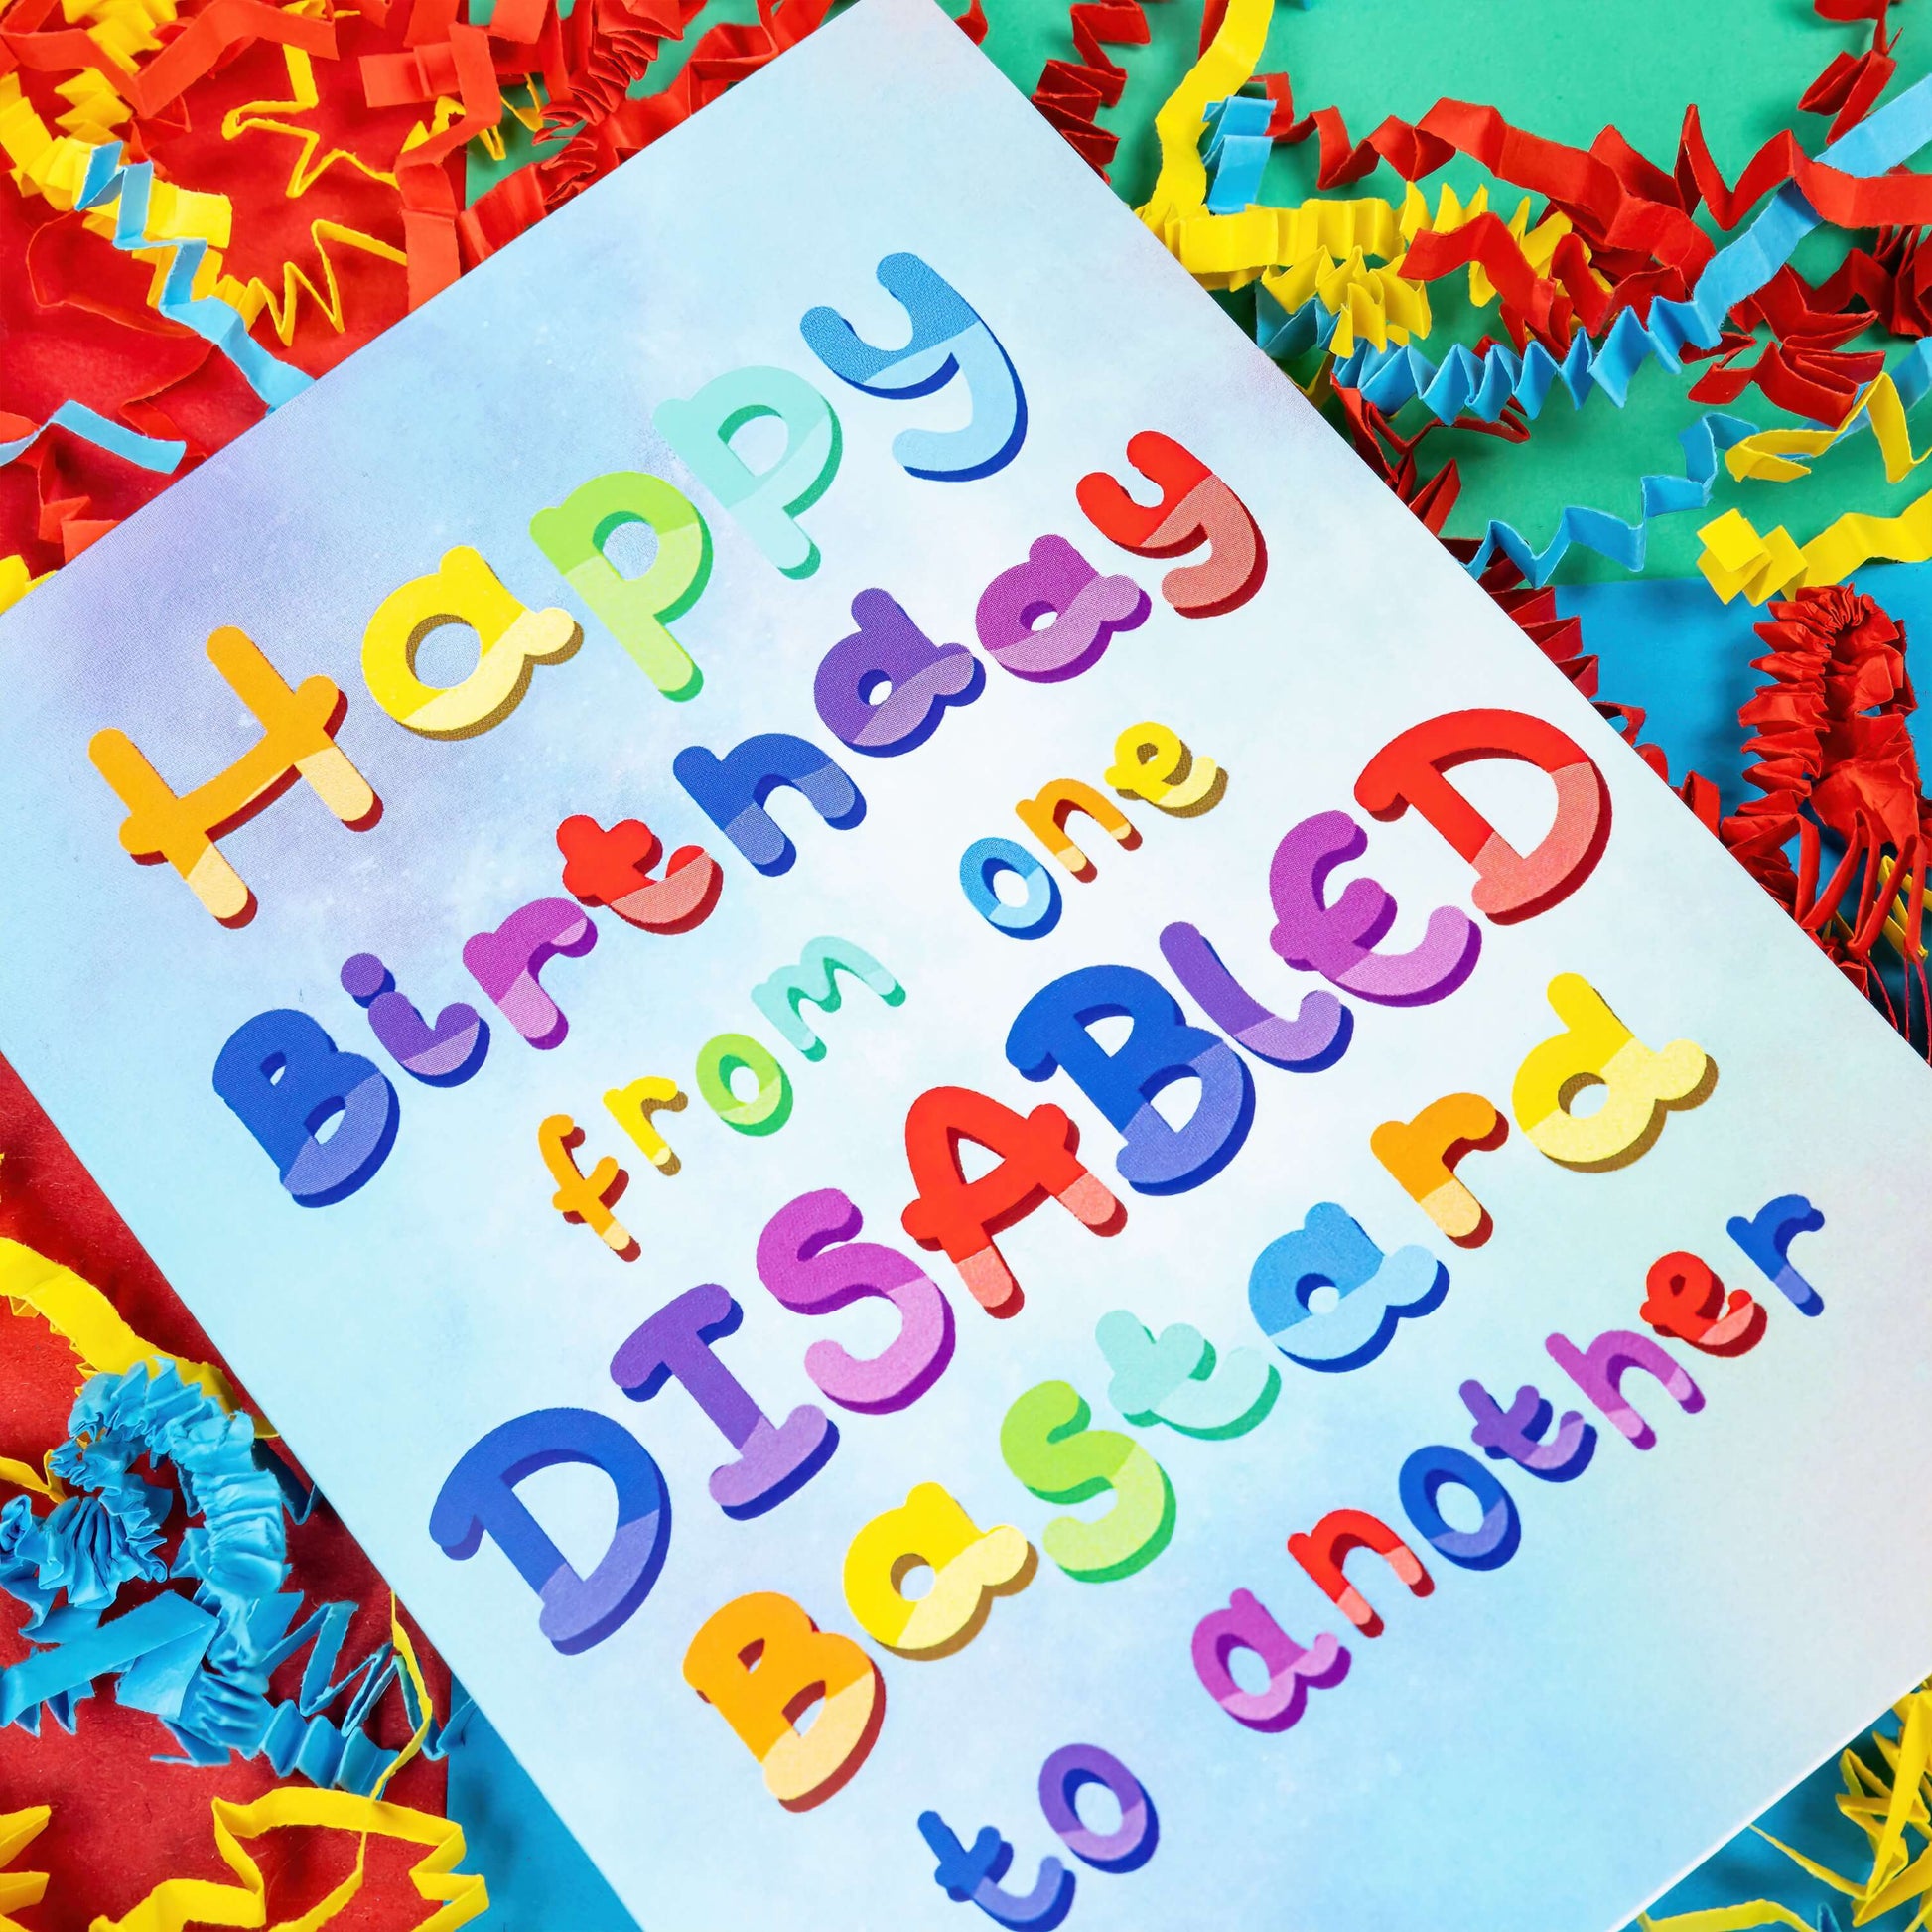 The Happy Birthday From One Disabled Bastard To Another Card on a red, blue and green background with red, yellow and blue crinkle card confetti. The pastel blue and purple a6 birthday card has rainbow bubble writing reading 'happy birthday from one disabled bastard to another'. The hand drawn design is a humorous greeting card raising awareness for disabled people.